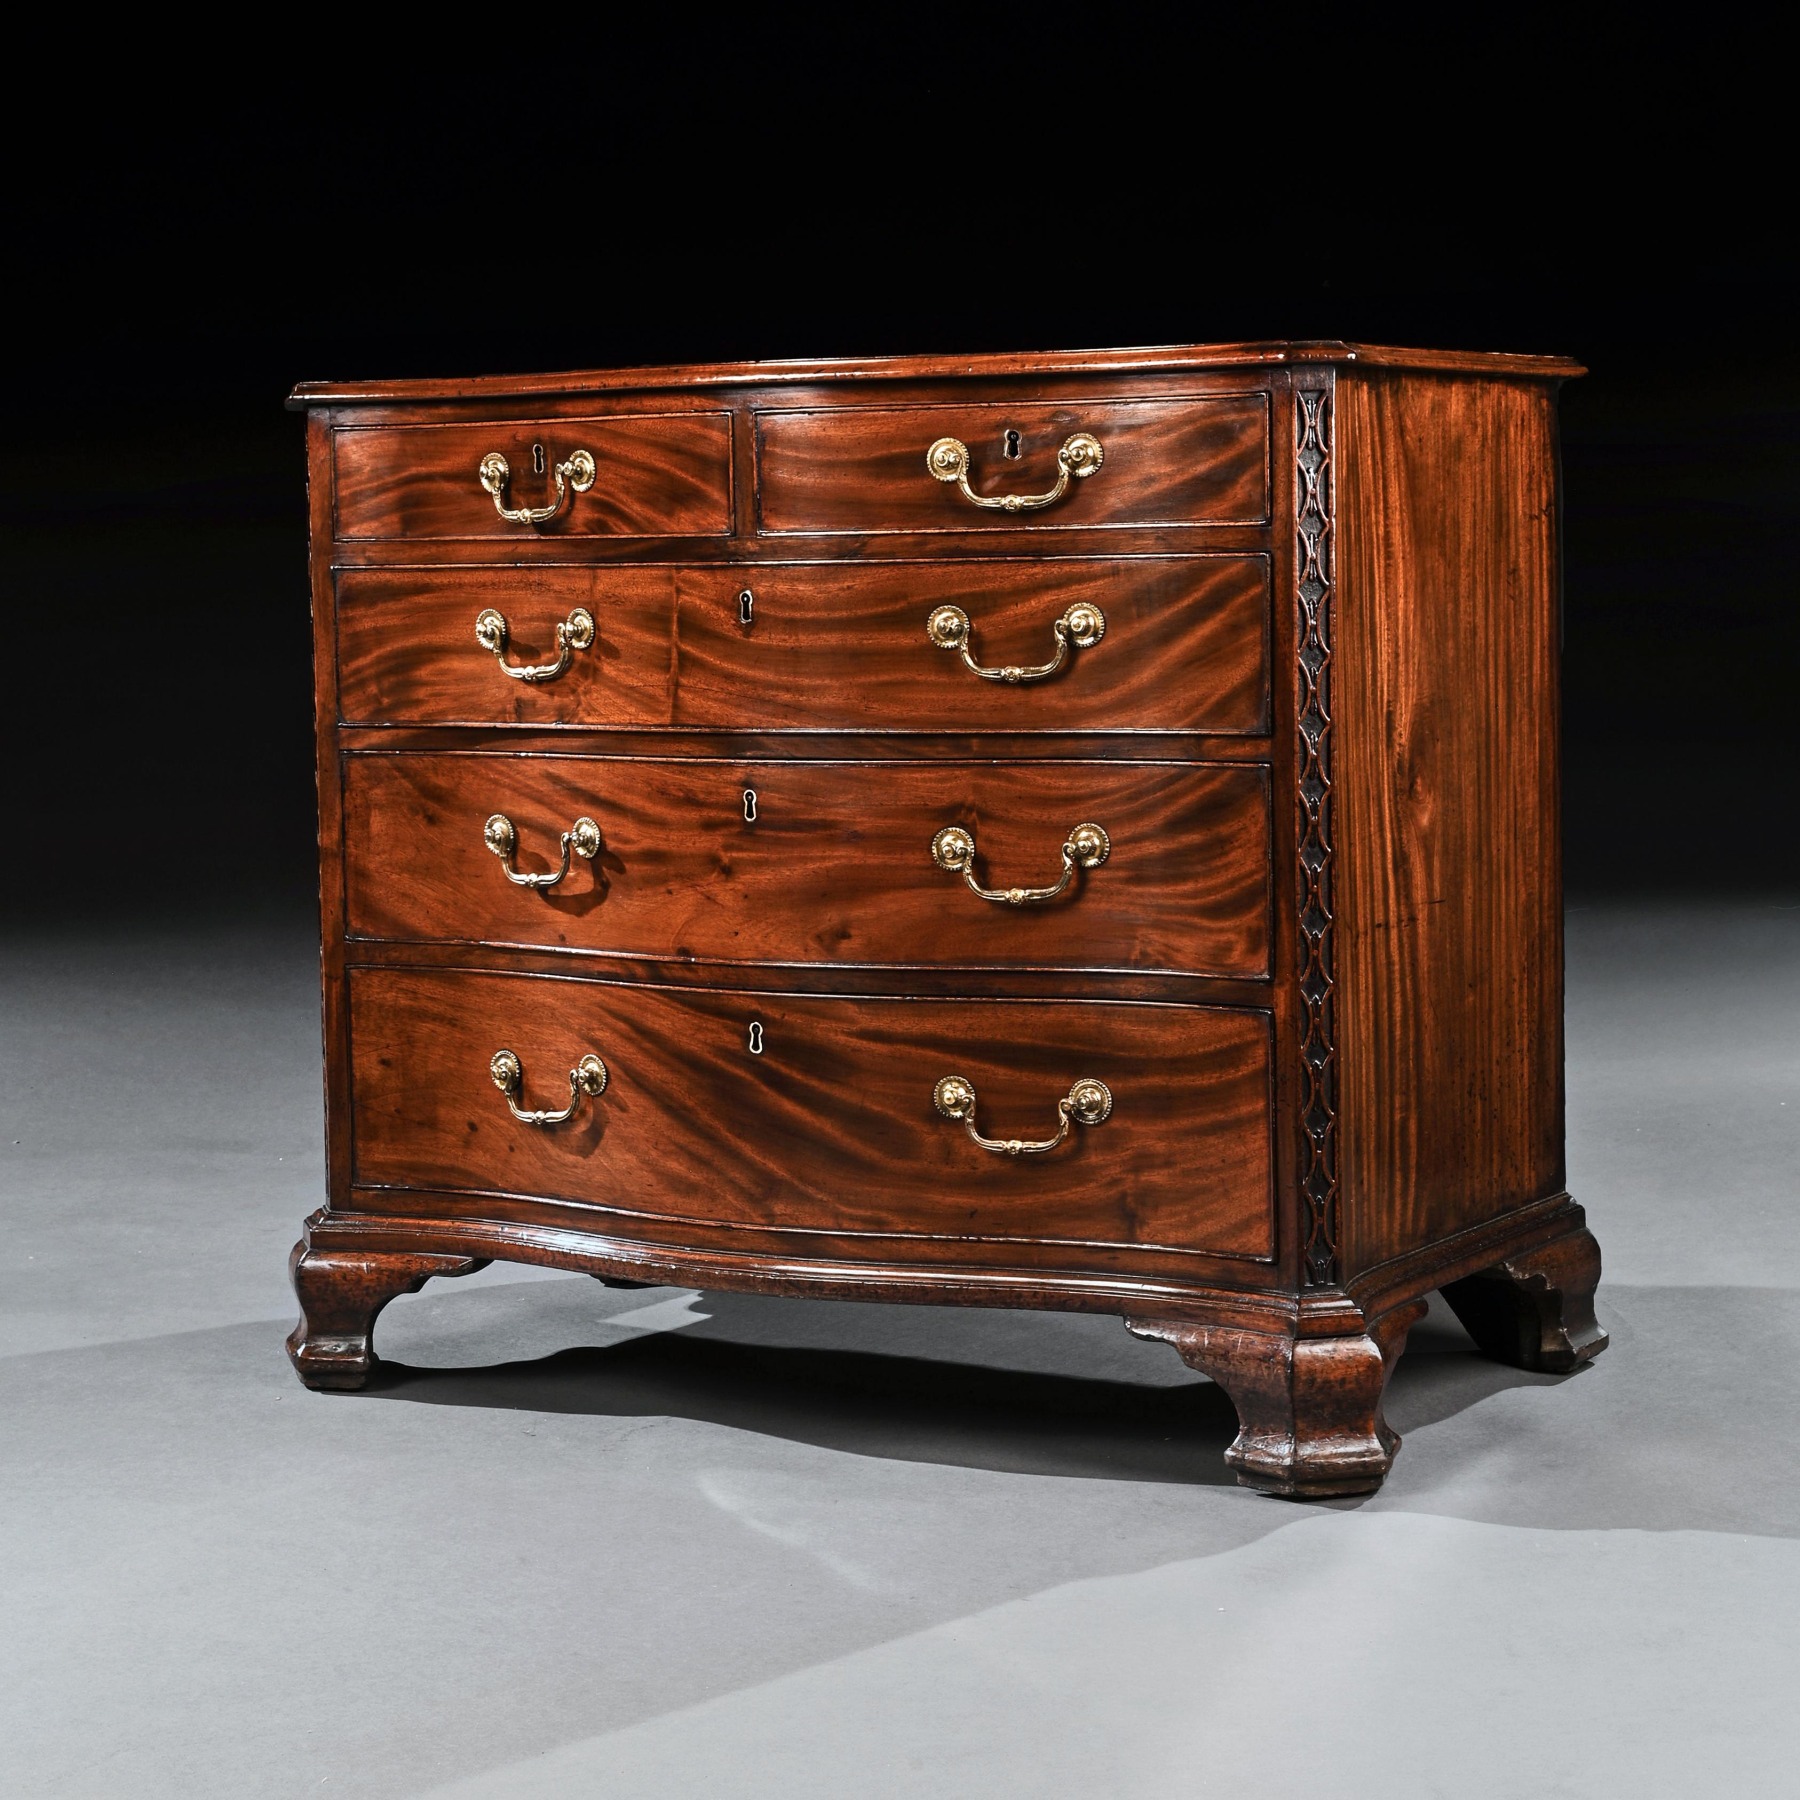 Chippendale Period 18th Century Serpentine Georgian Mahogany Chest Of Drawers